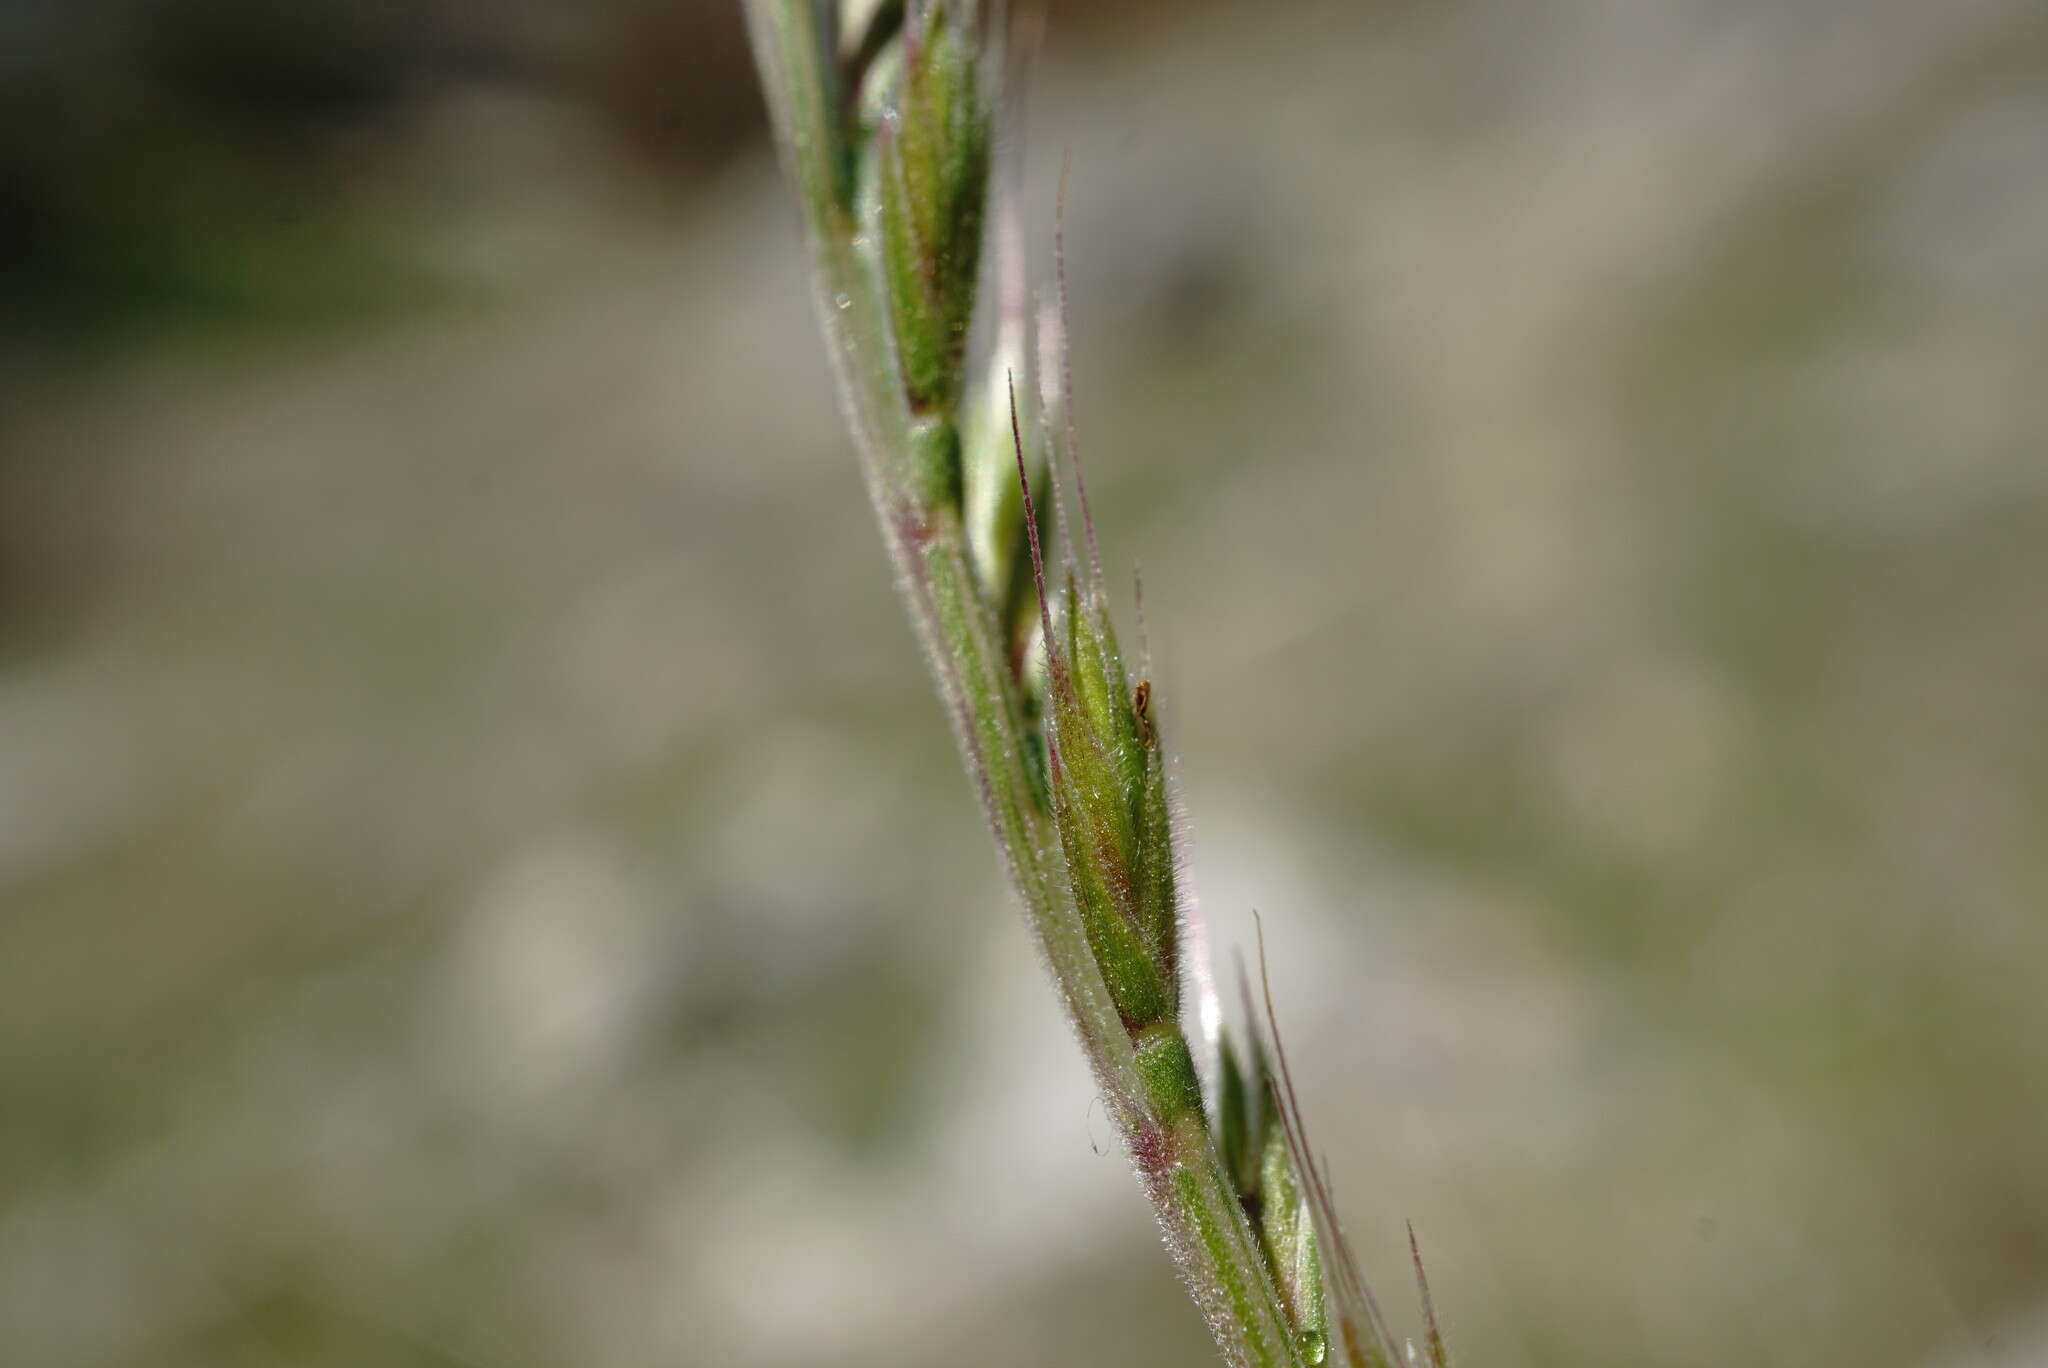 Image of mat-grass fescue